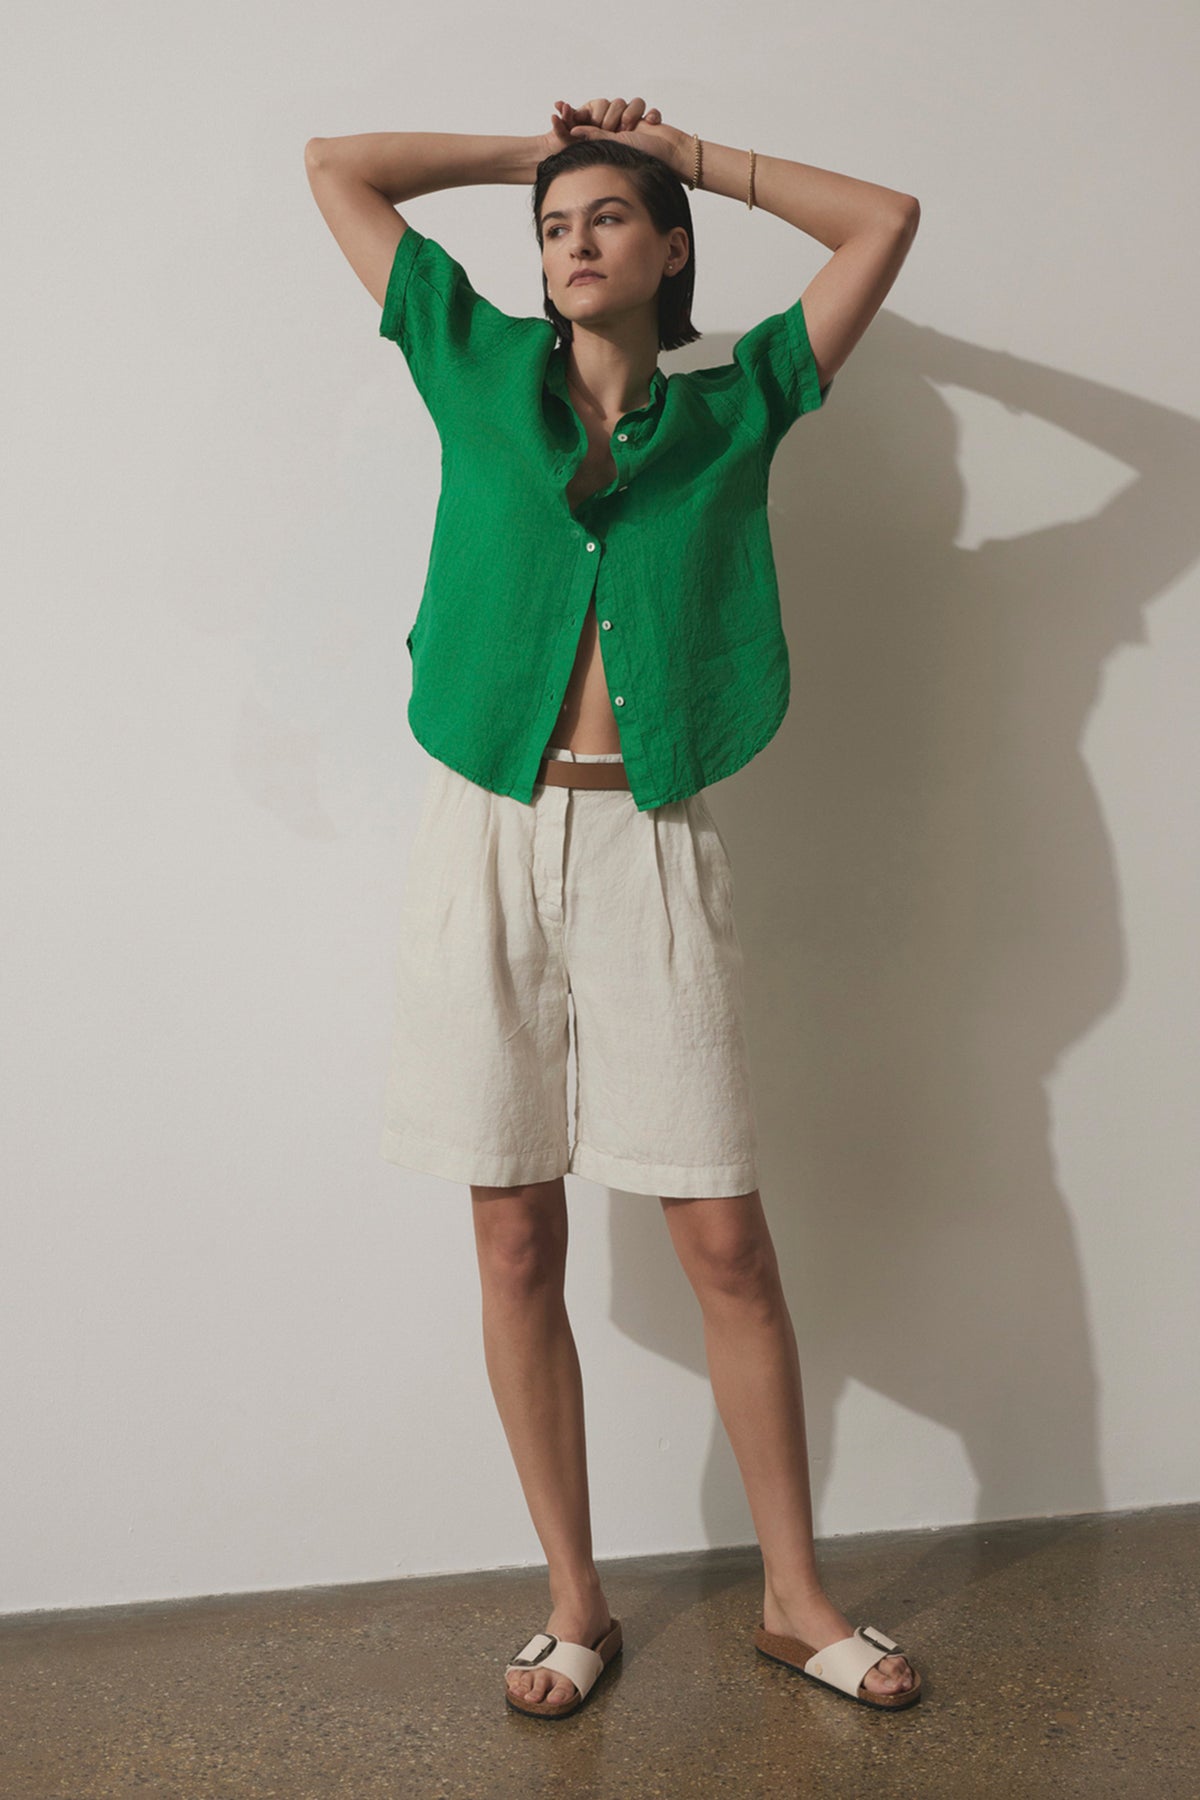 Woman in a green CLAREMONT LINEN SHIRT by Velvet by Jenny Graham and beige shorts posing with hands behind head against a light background.-36753623548097